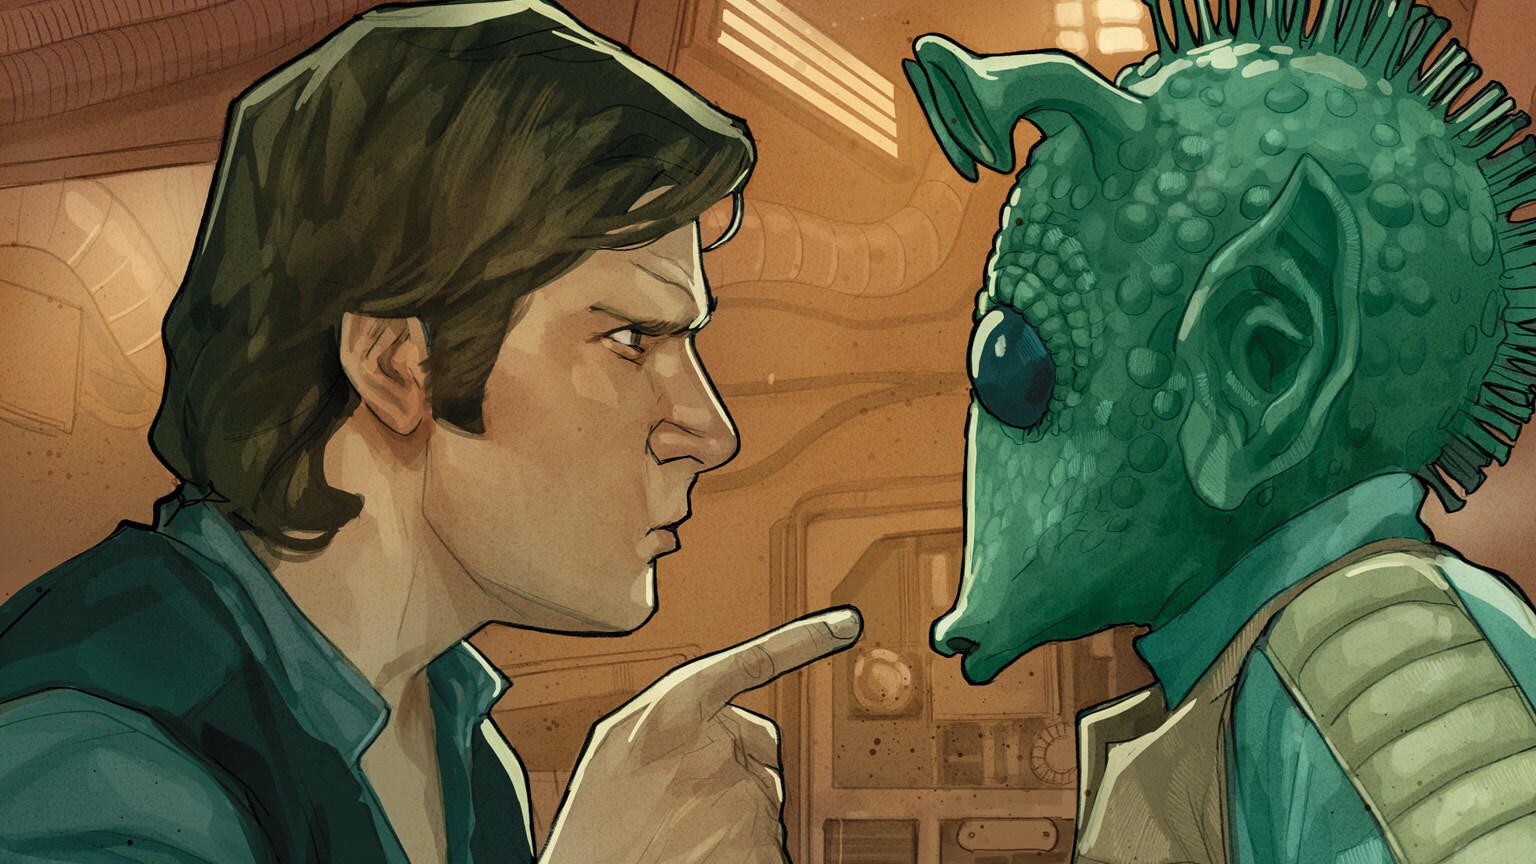 Meet Han Solo's Father in Marvel's Star Wars: Han Solo & Chewbacca #2 - Exclusive Preview